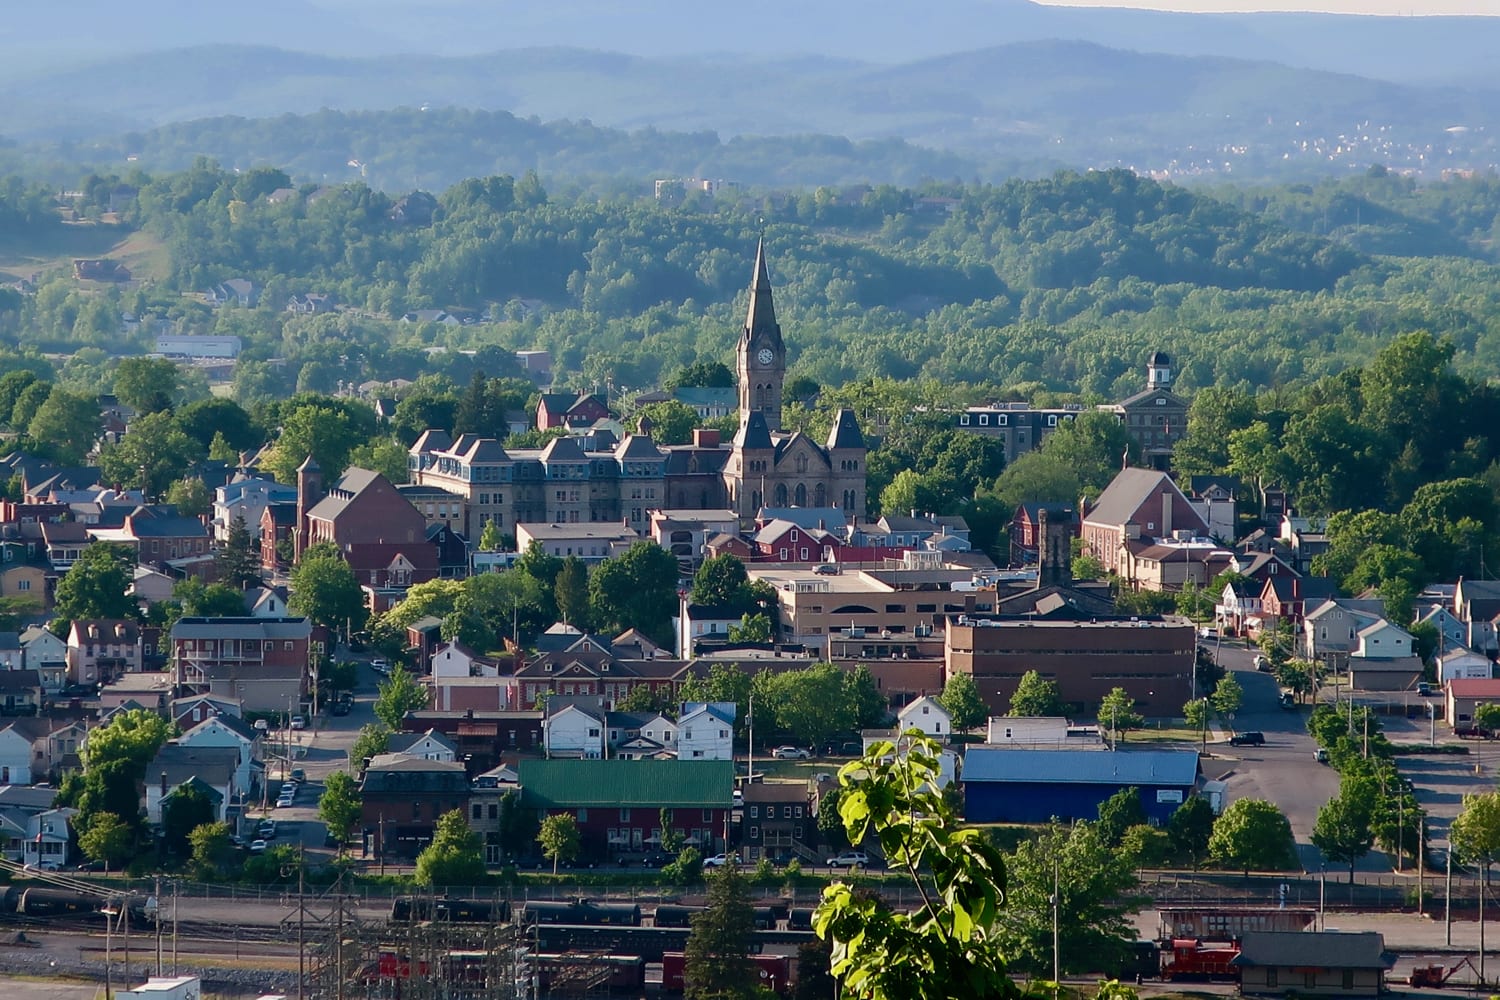 View of downtown Hollidaysburg from Chimney Rocks Park